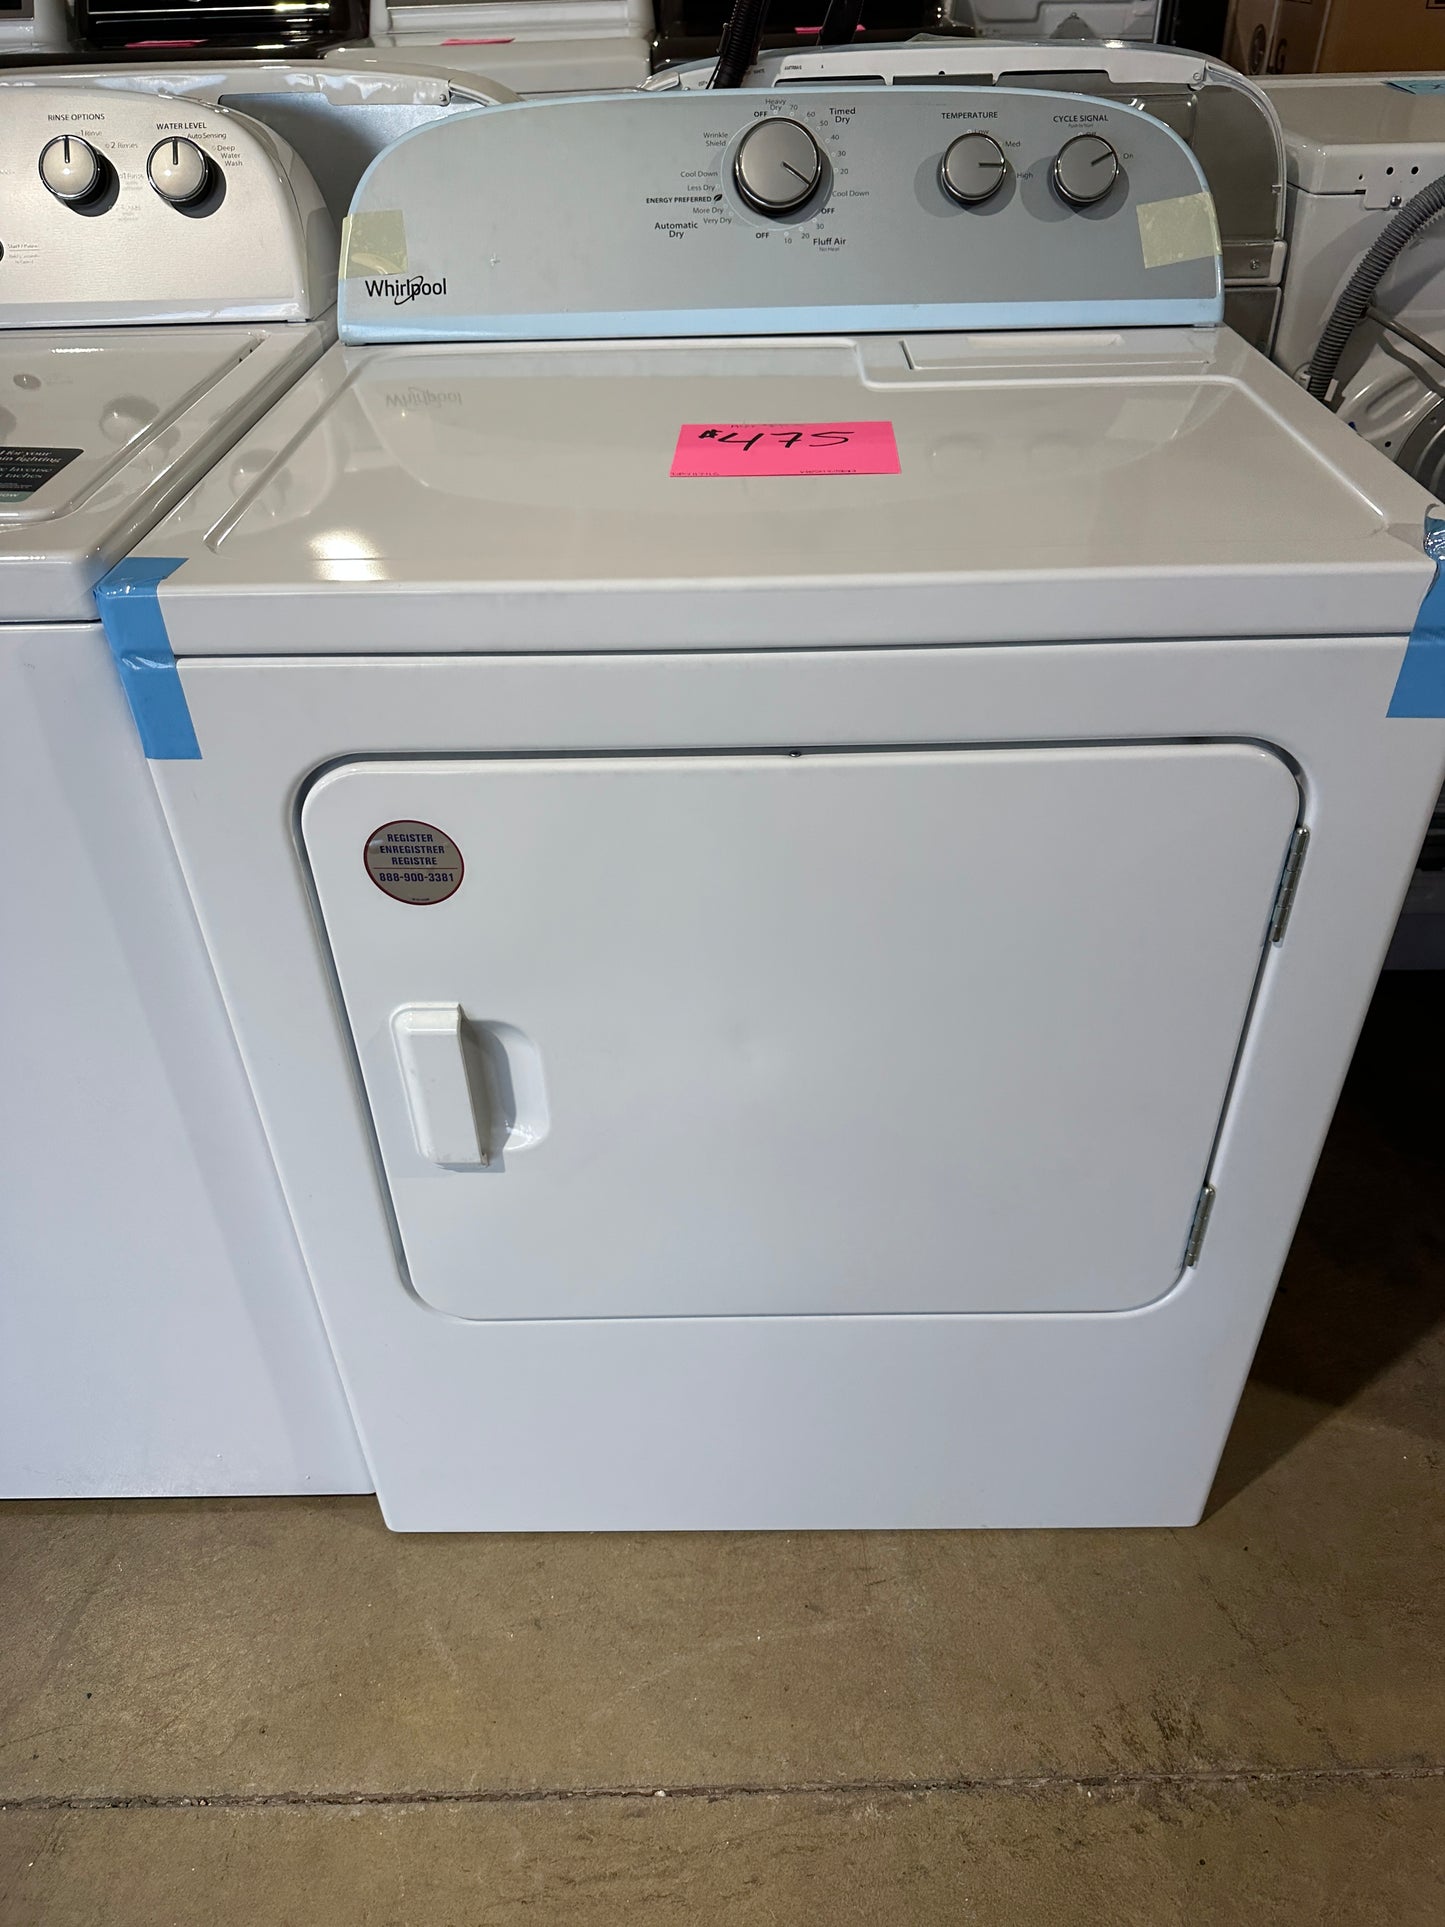 ELECTRIC DRYER WITH AUTODRY DRYING SYSTEM - DRY11711S WED4985EW